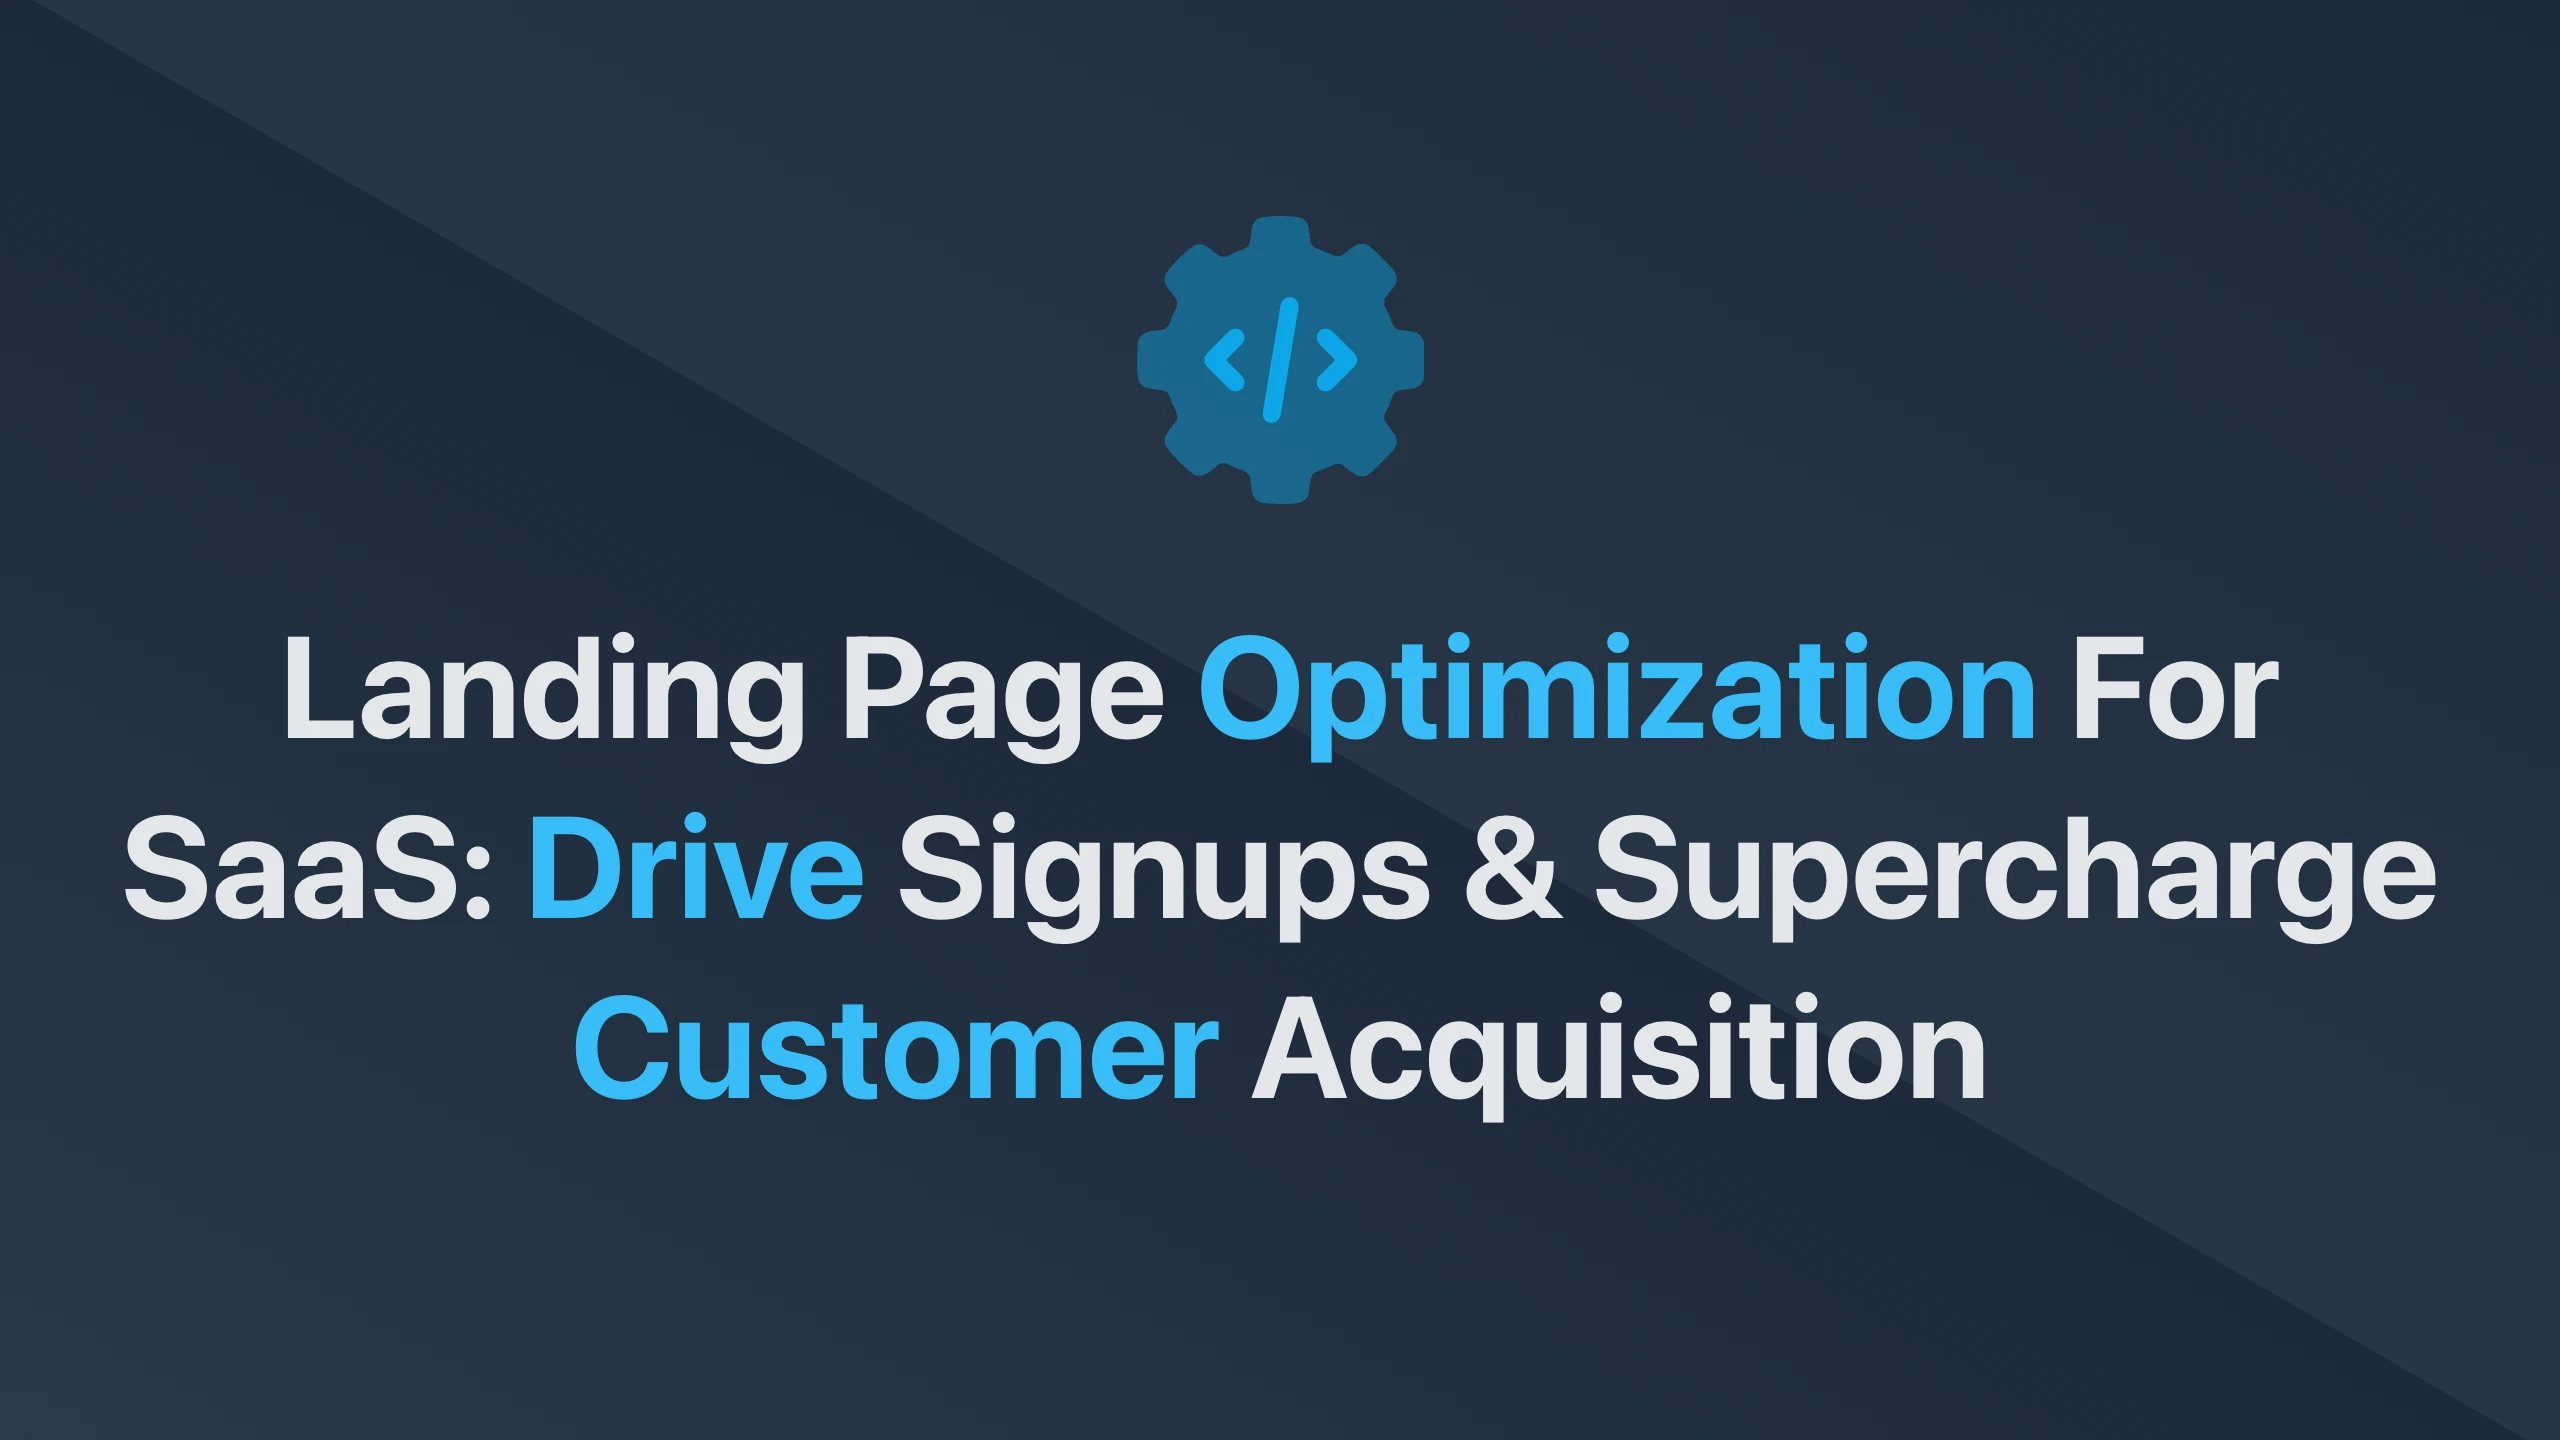 Cover Image for Landing Page Optimization for SaaS: Drive Signups & Supercharge Customer Acquisition